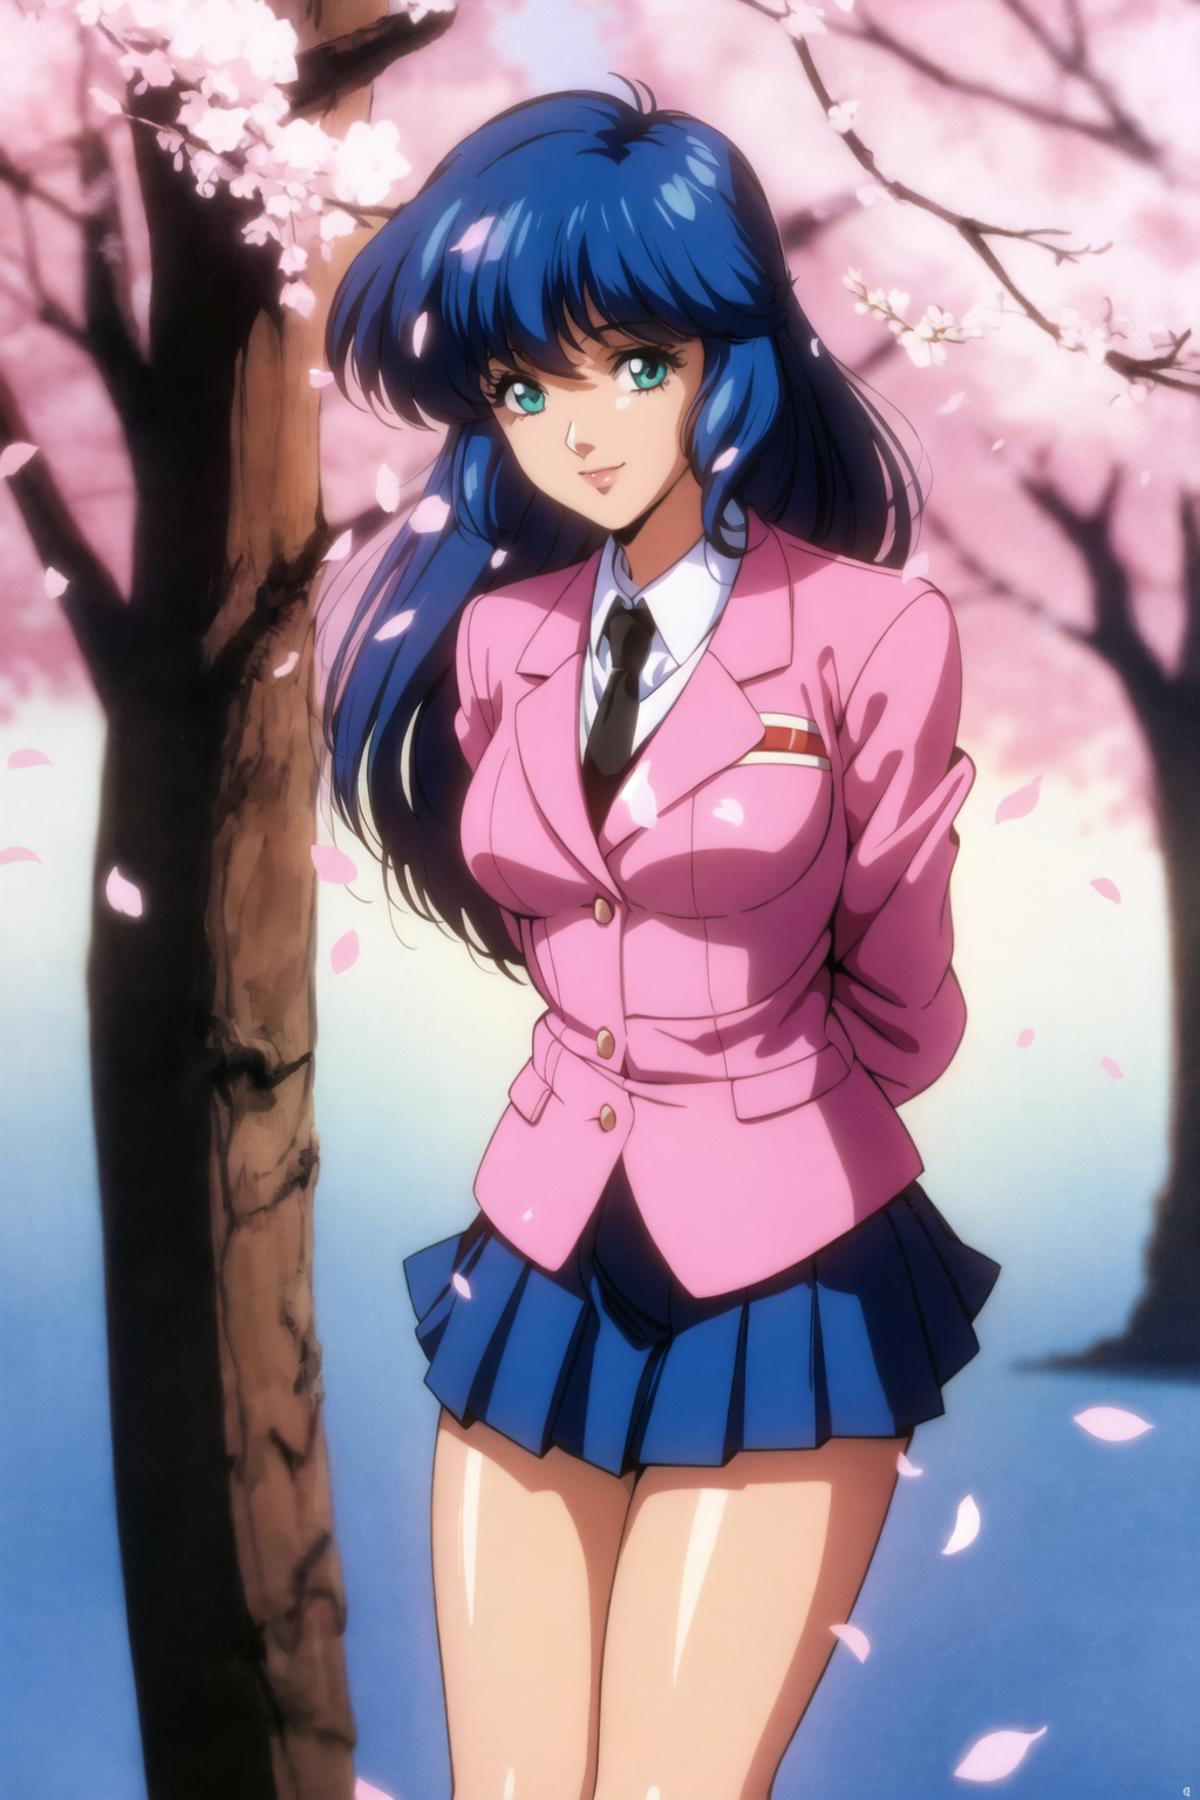 Anime girl wearing a pink jacket, tie, and blue skirt posing for a picture.